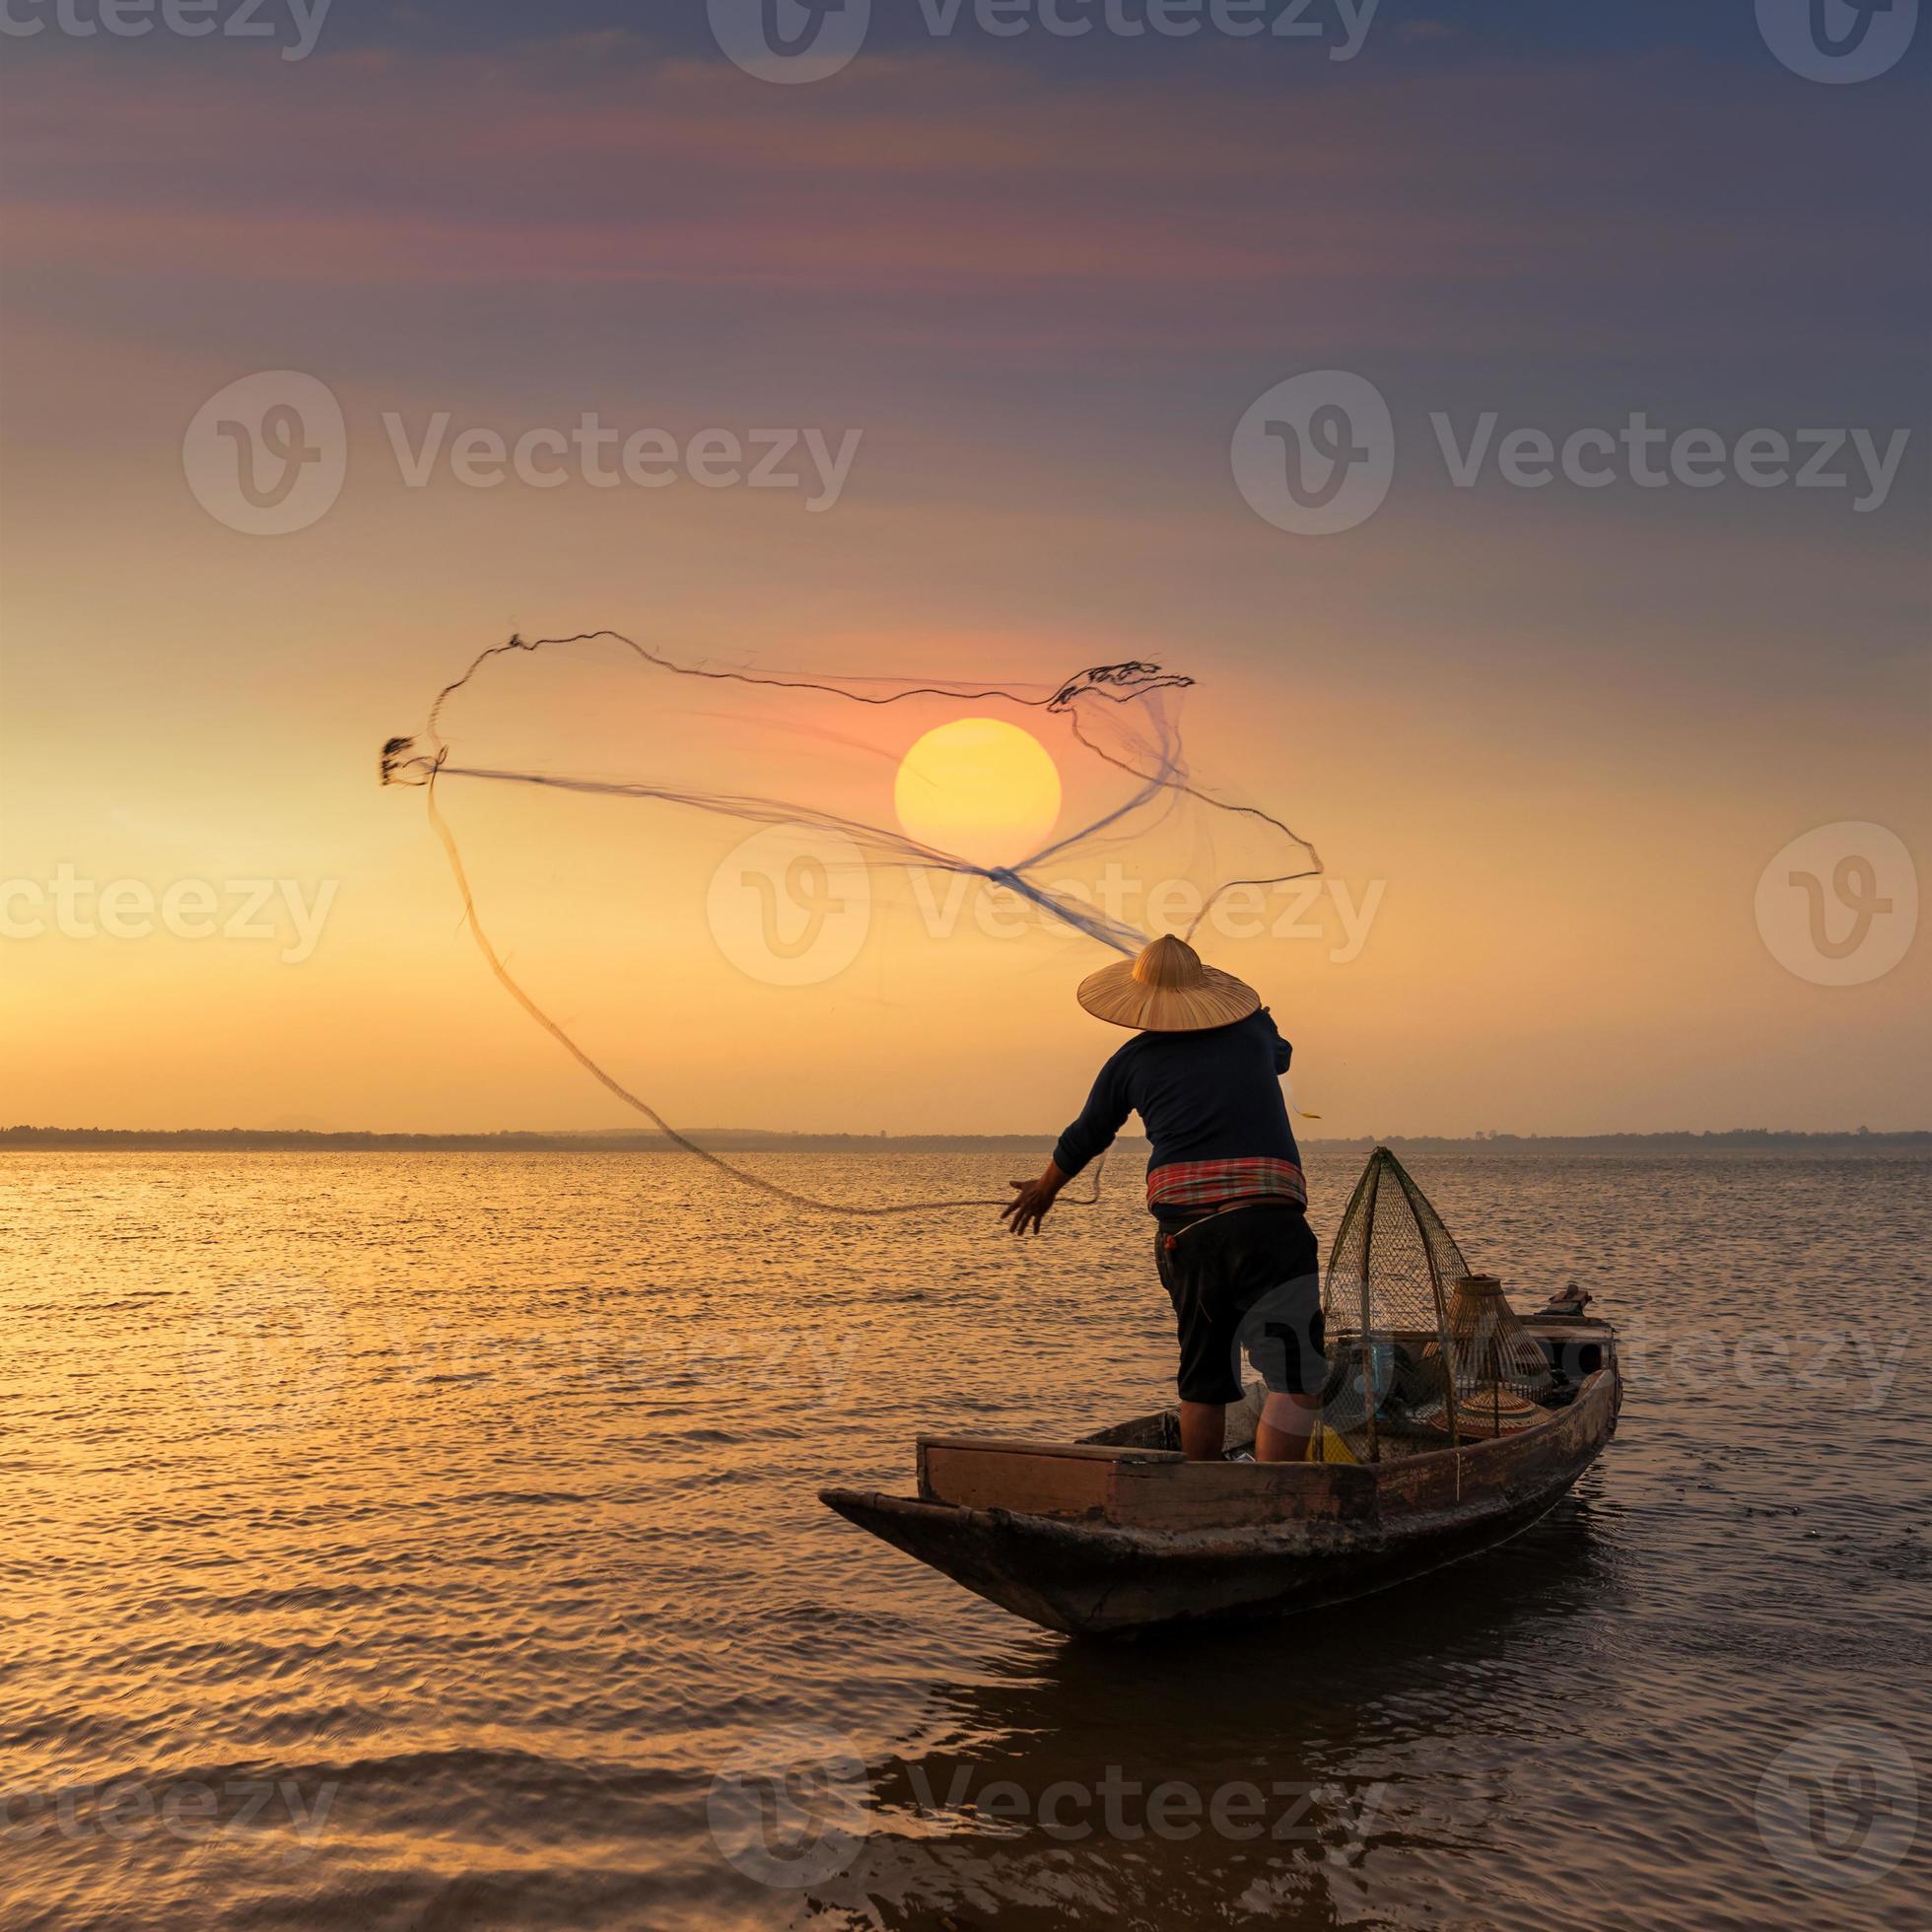 https://static.vecteezy.com/system/resources/previews/004/954/043/large_2x/asian-fisherman-on-wooden-boat-throwing-a-net-for-catching-freshwater-fish-in-nature-river-in-the-early-during-sunrise-time-photo.jpg